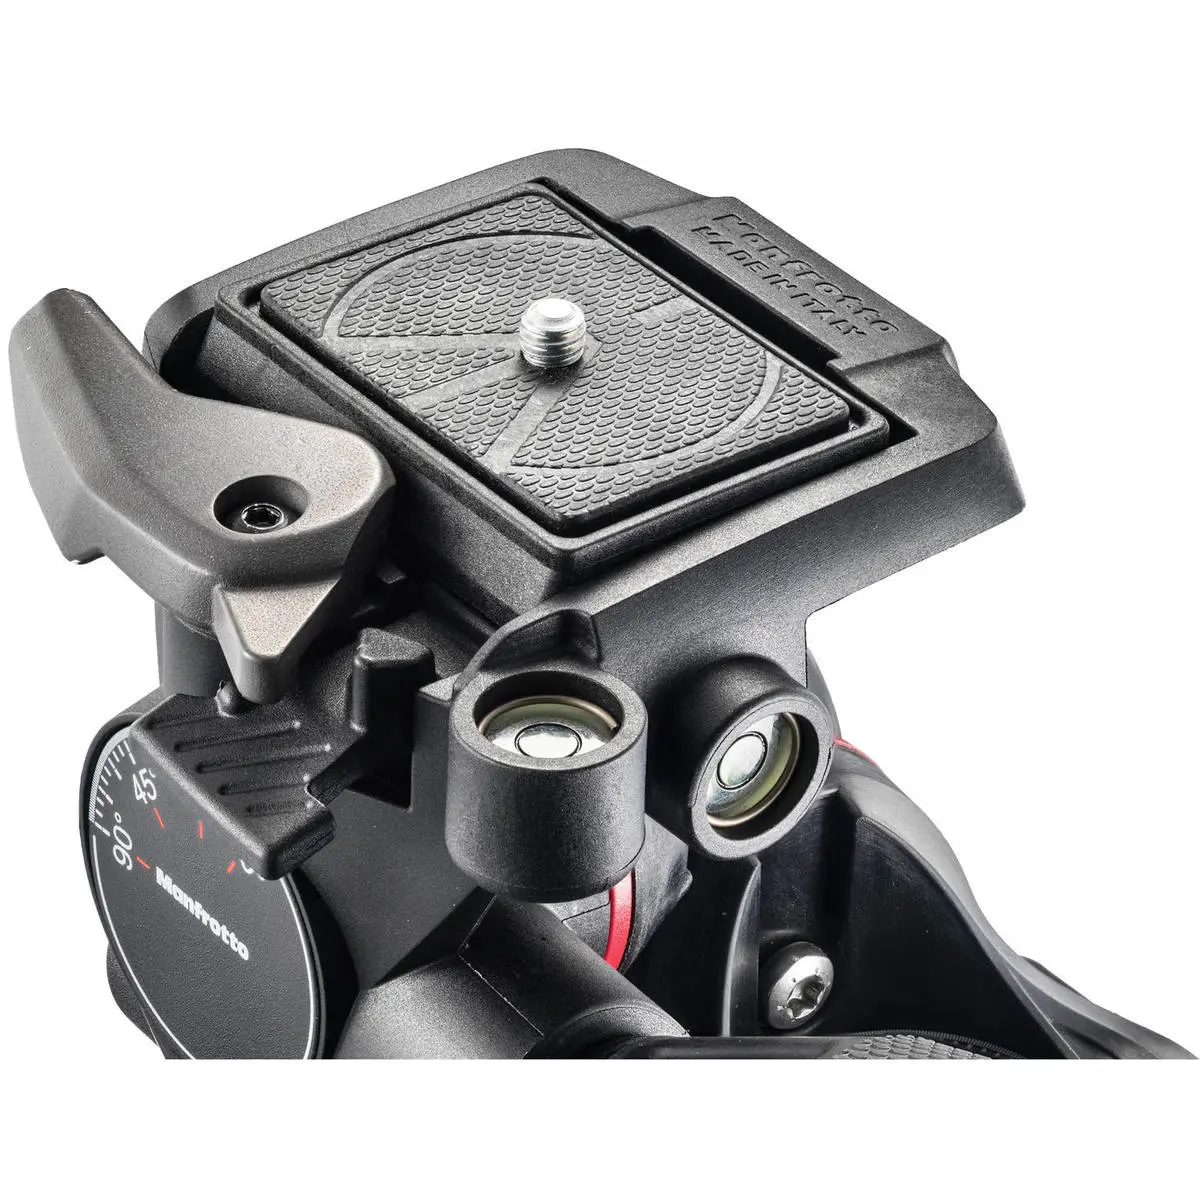 3. Manfrotto Xpro Geared 3-Way Head MHXPRO-3WG